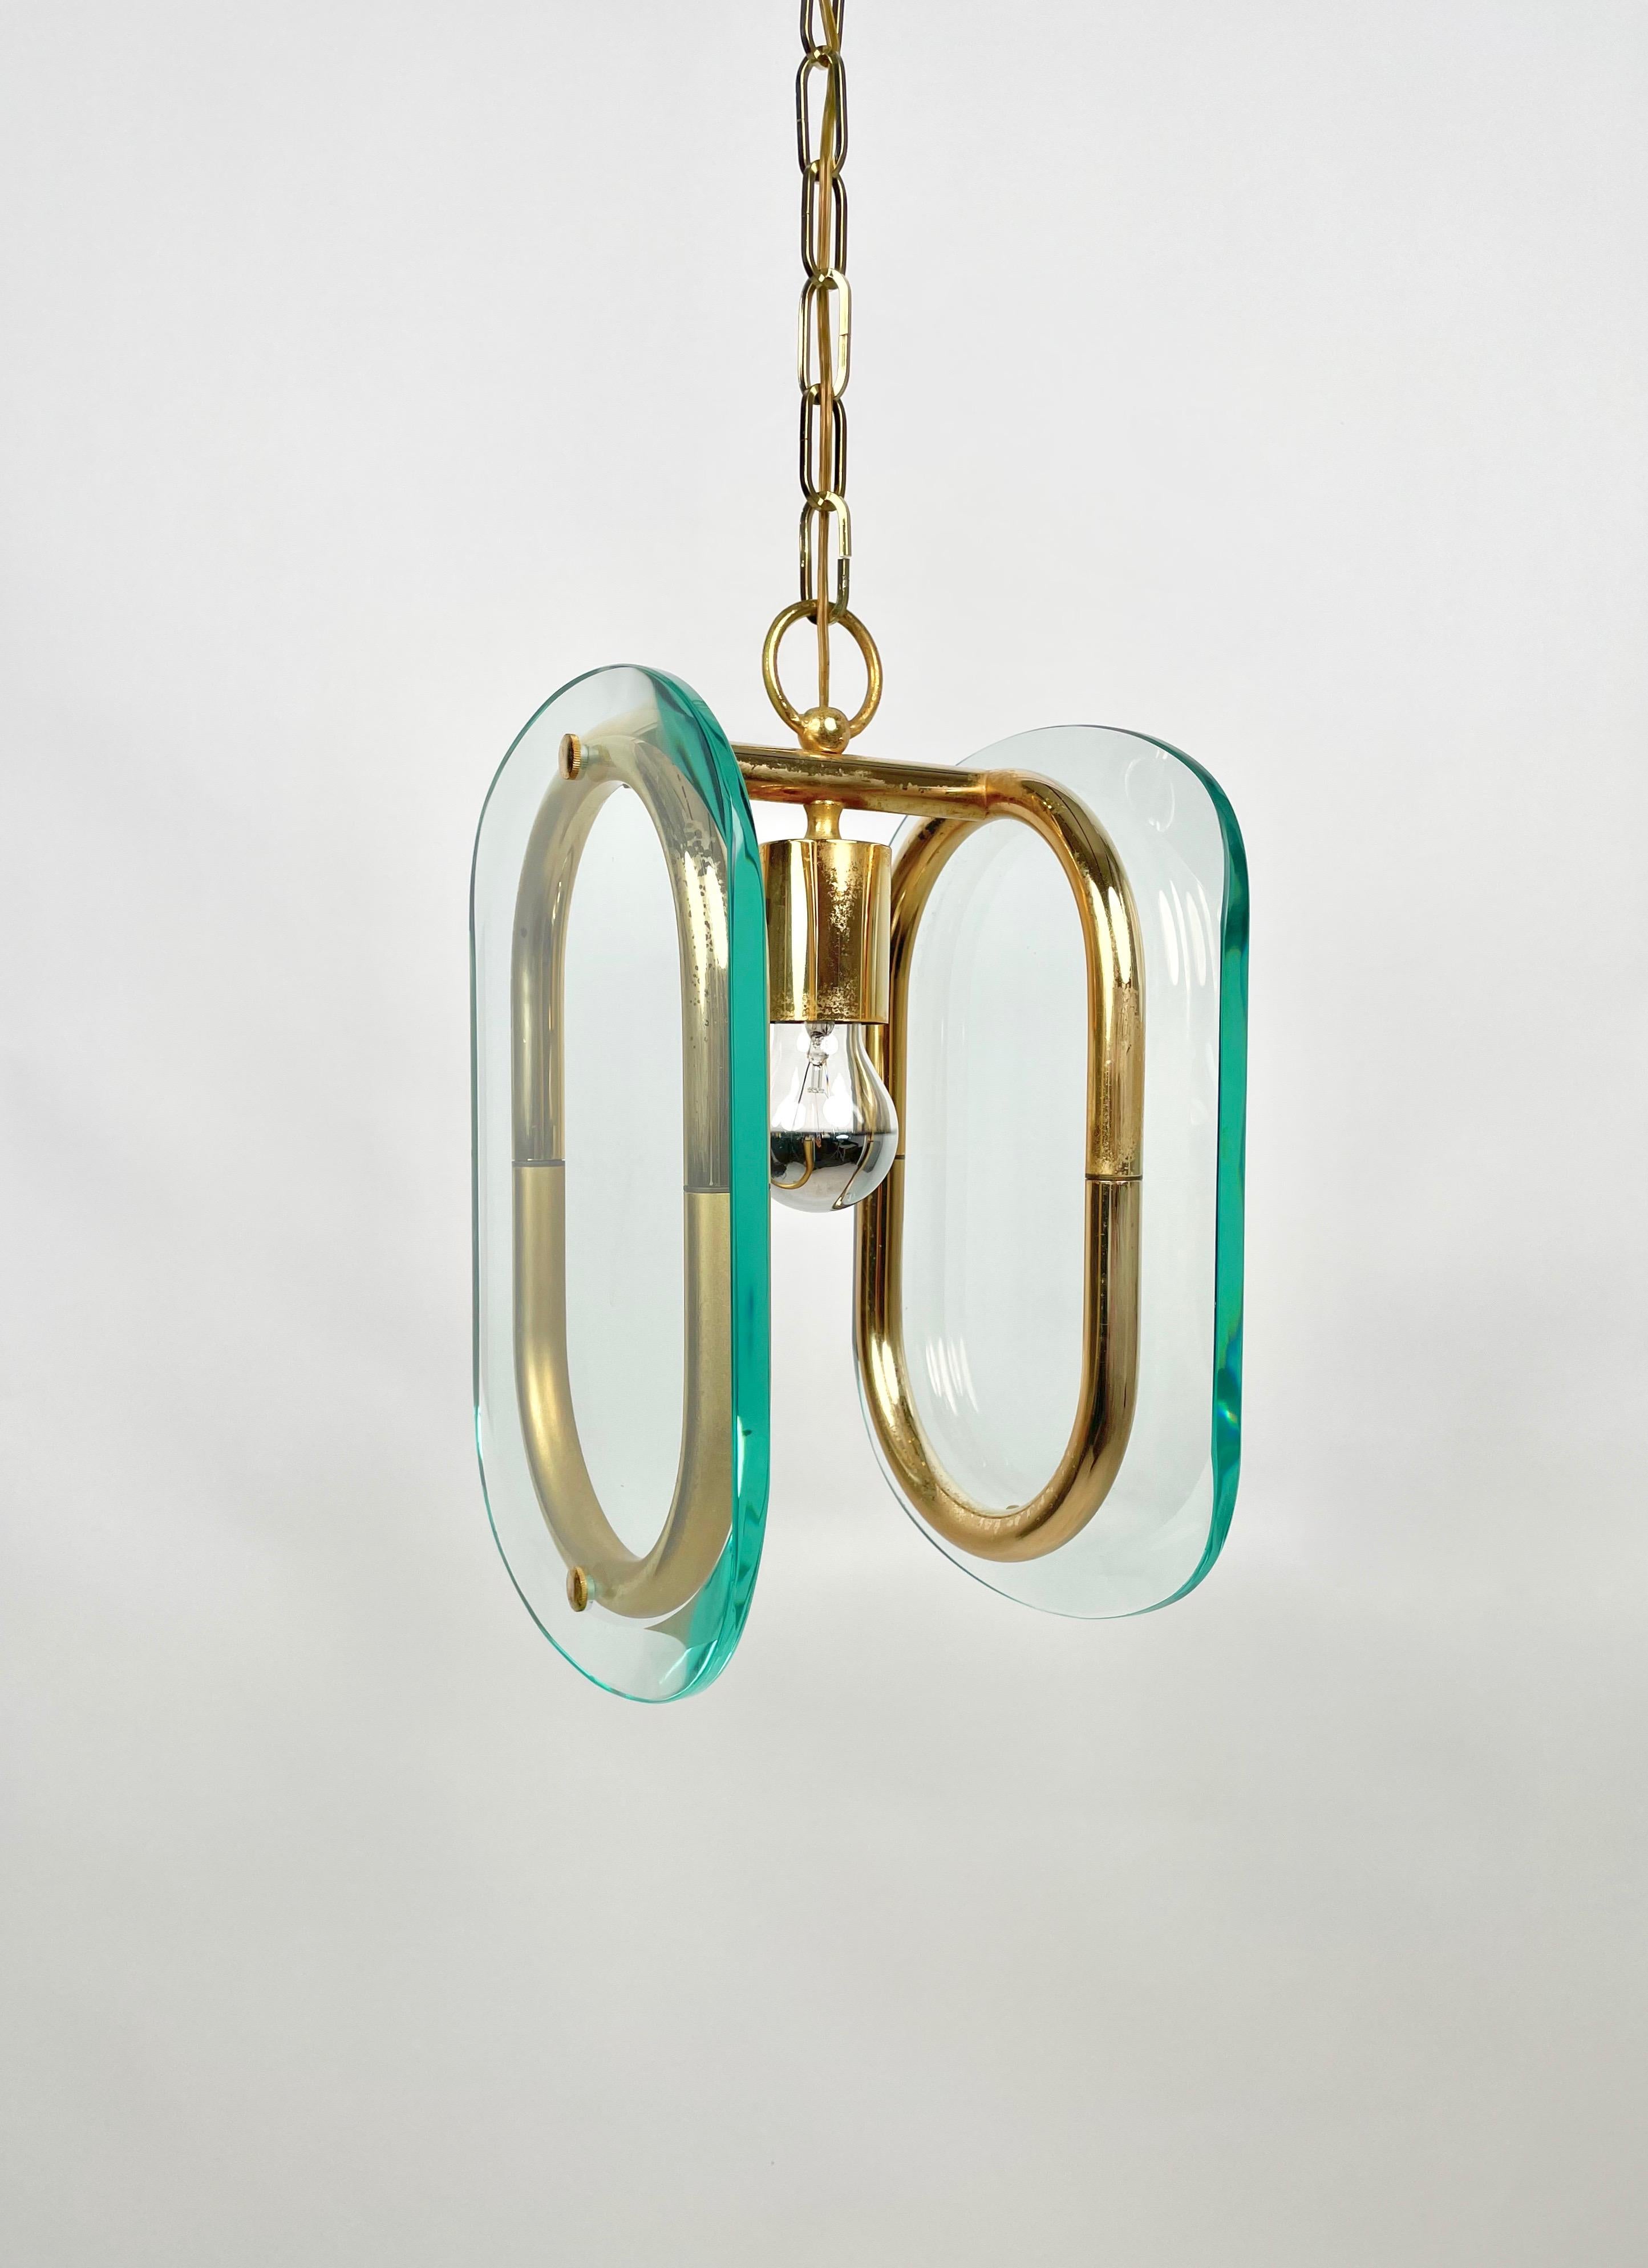 Chandelier featuring brass structure and chain and two oval glass in the style of Fontana Arte. Made in Italy in the 1970s. 

Measures: Height with chain: 90 cm. 
Height without chain: 37 cm.
 